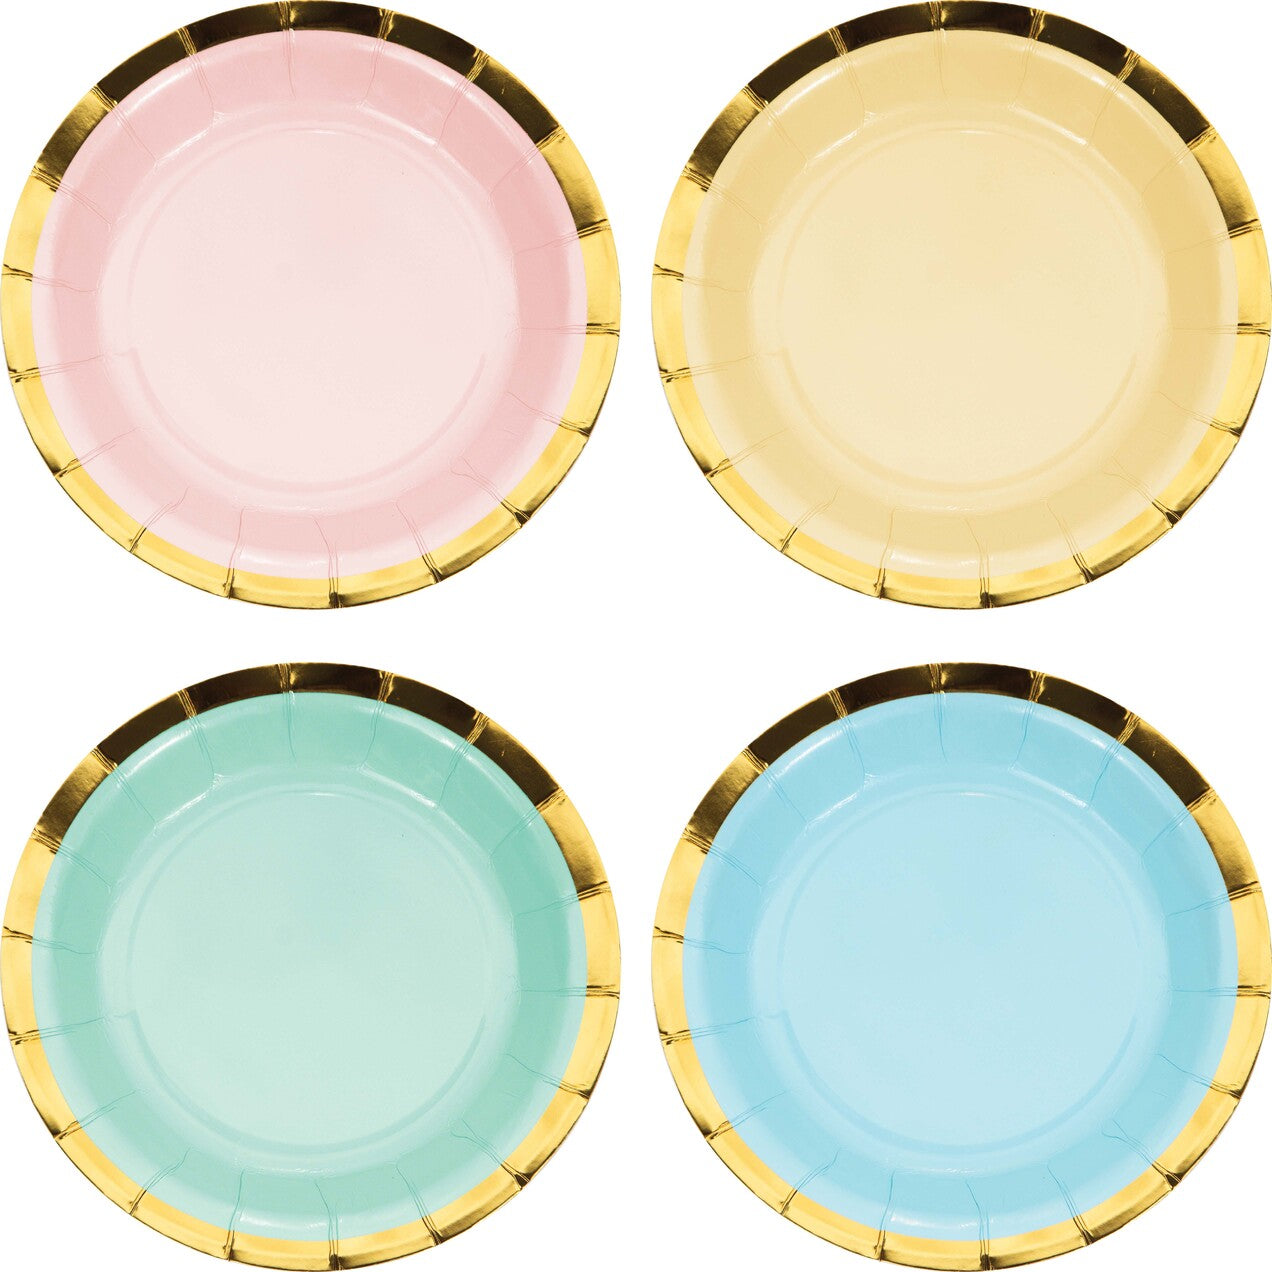 Festive plate in pastel color, 8 different colors